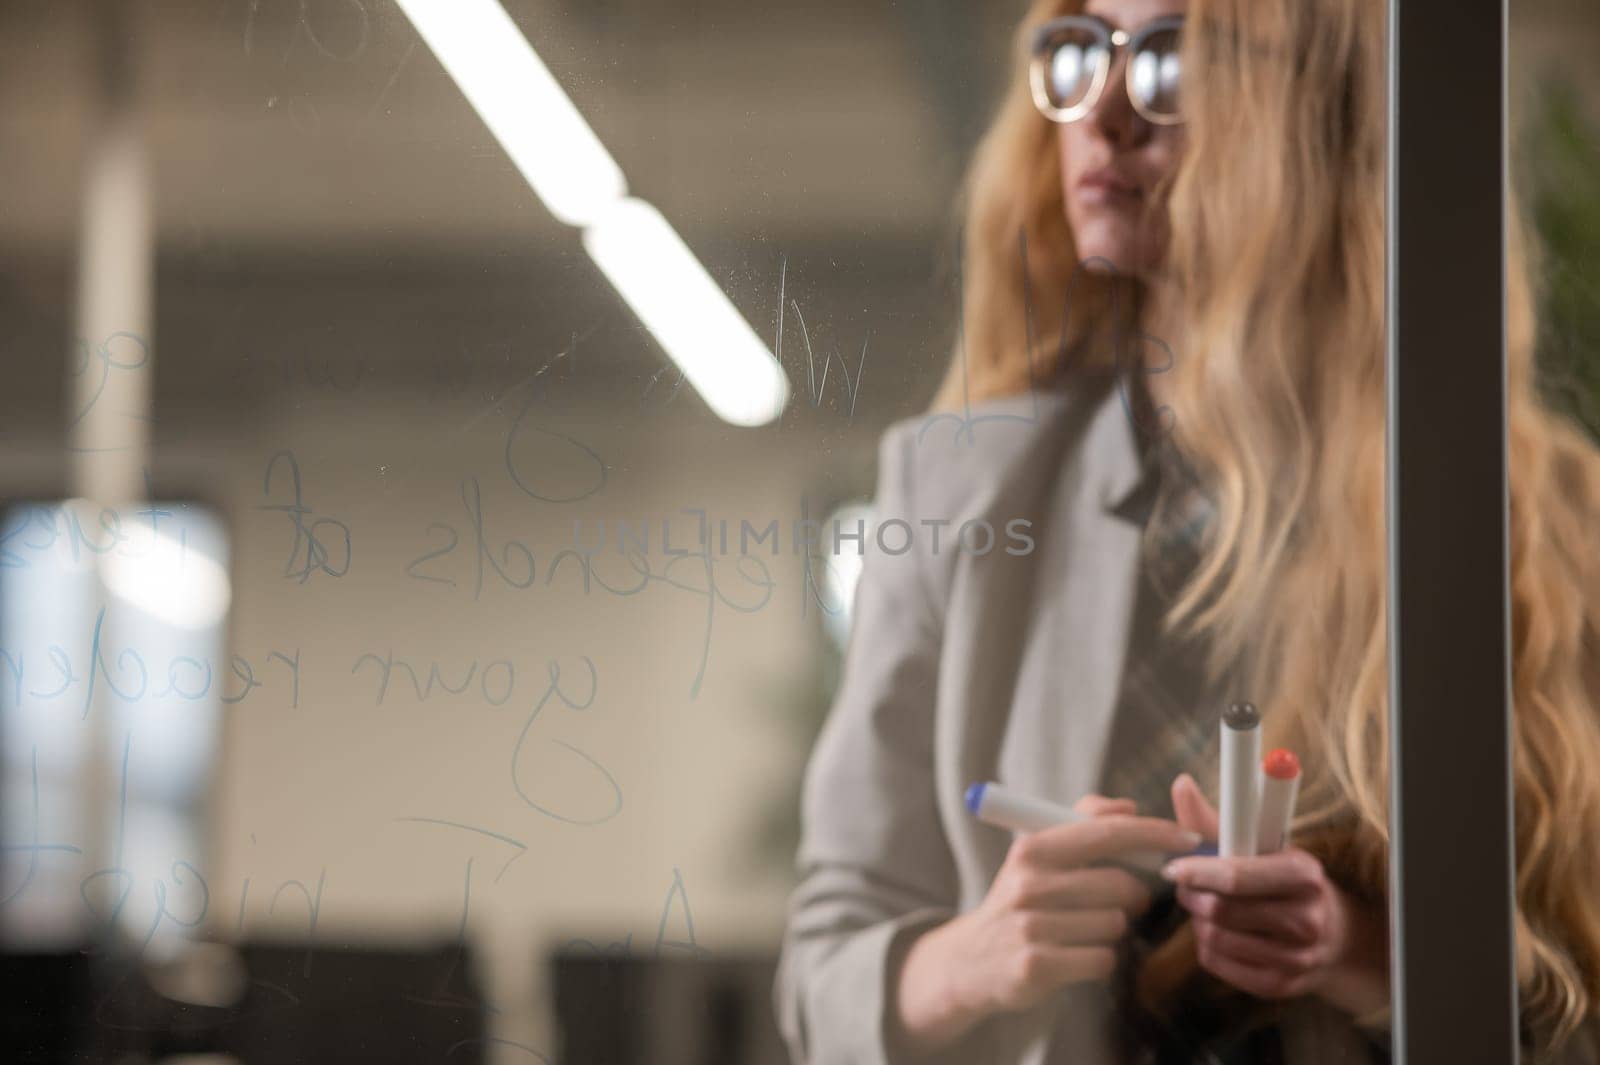 Caucasian woman with glasses writes text in English on a glass wall. by mrwed54